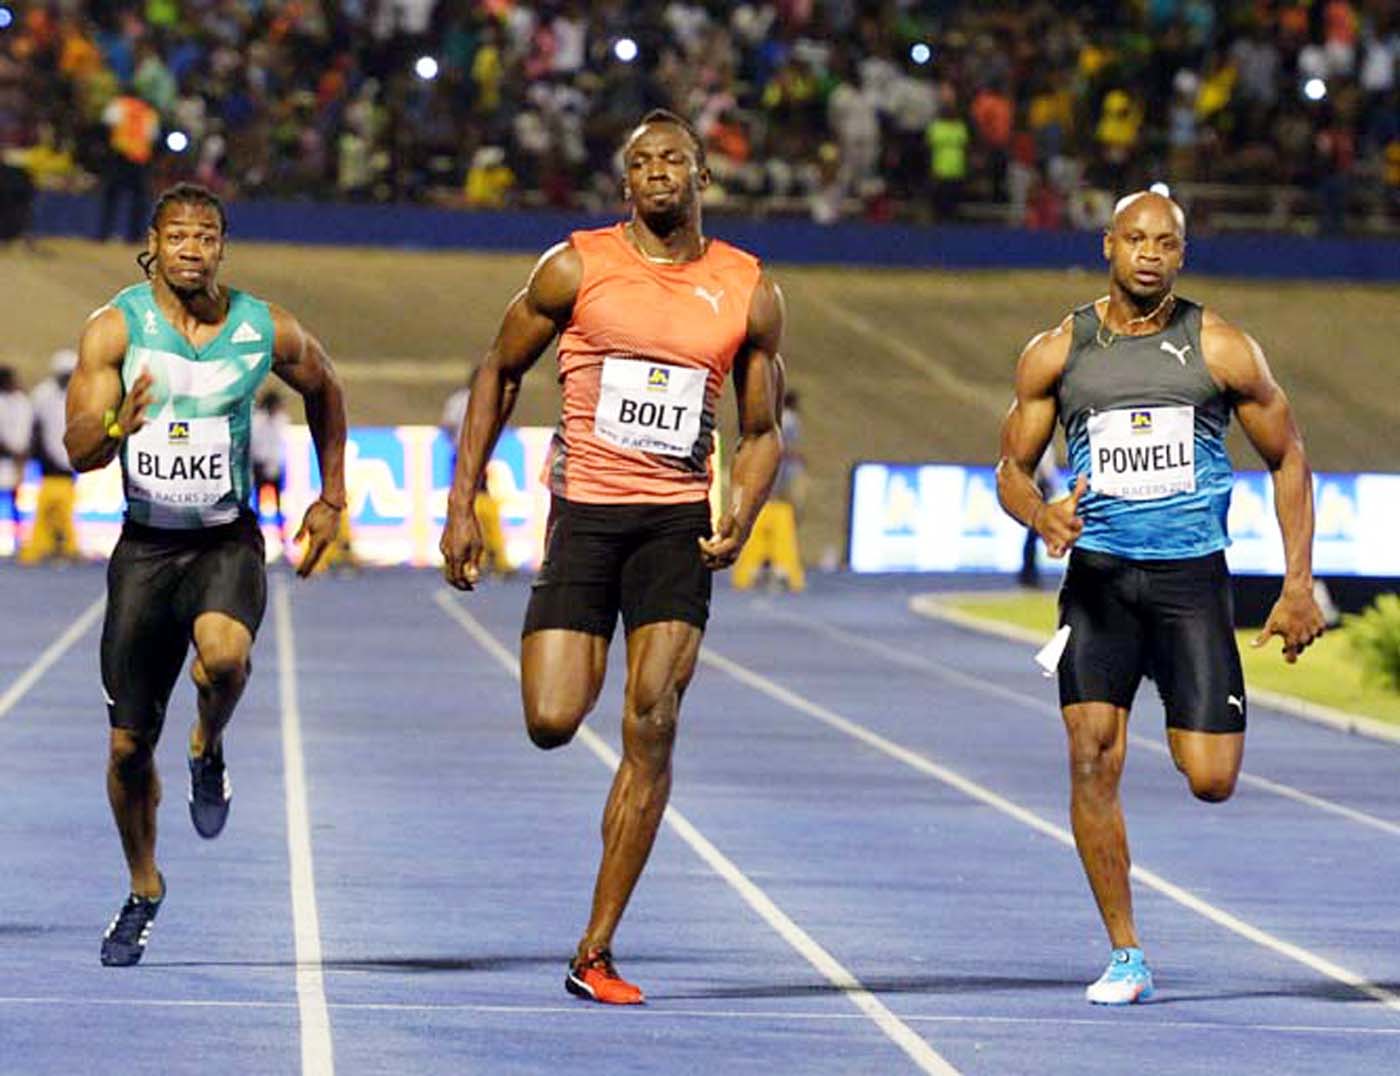 Watch the Nitro Athletics series LIVE with Usain Bolt